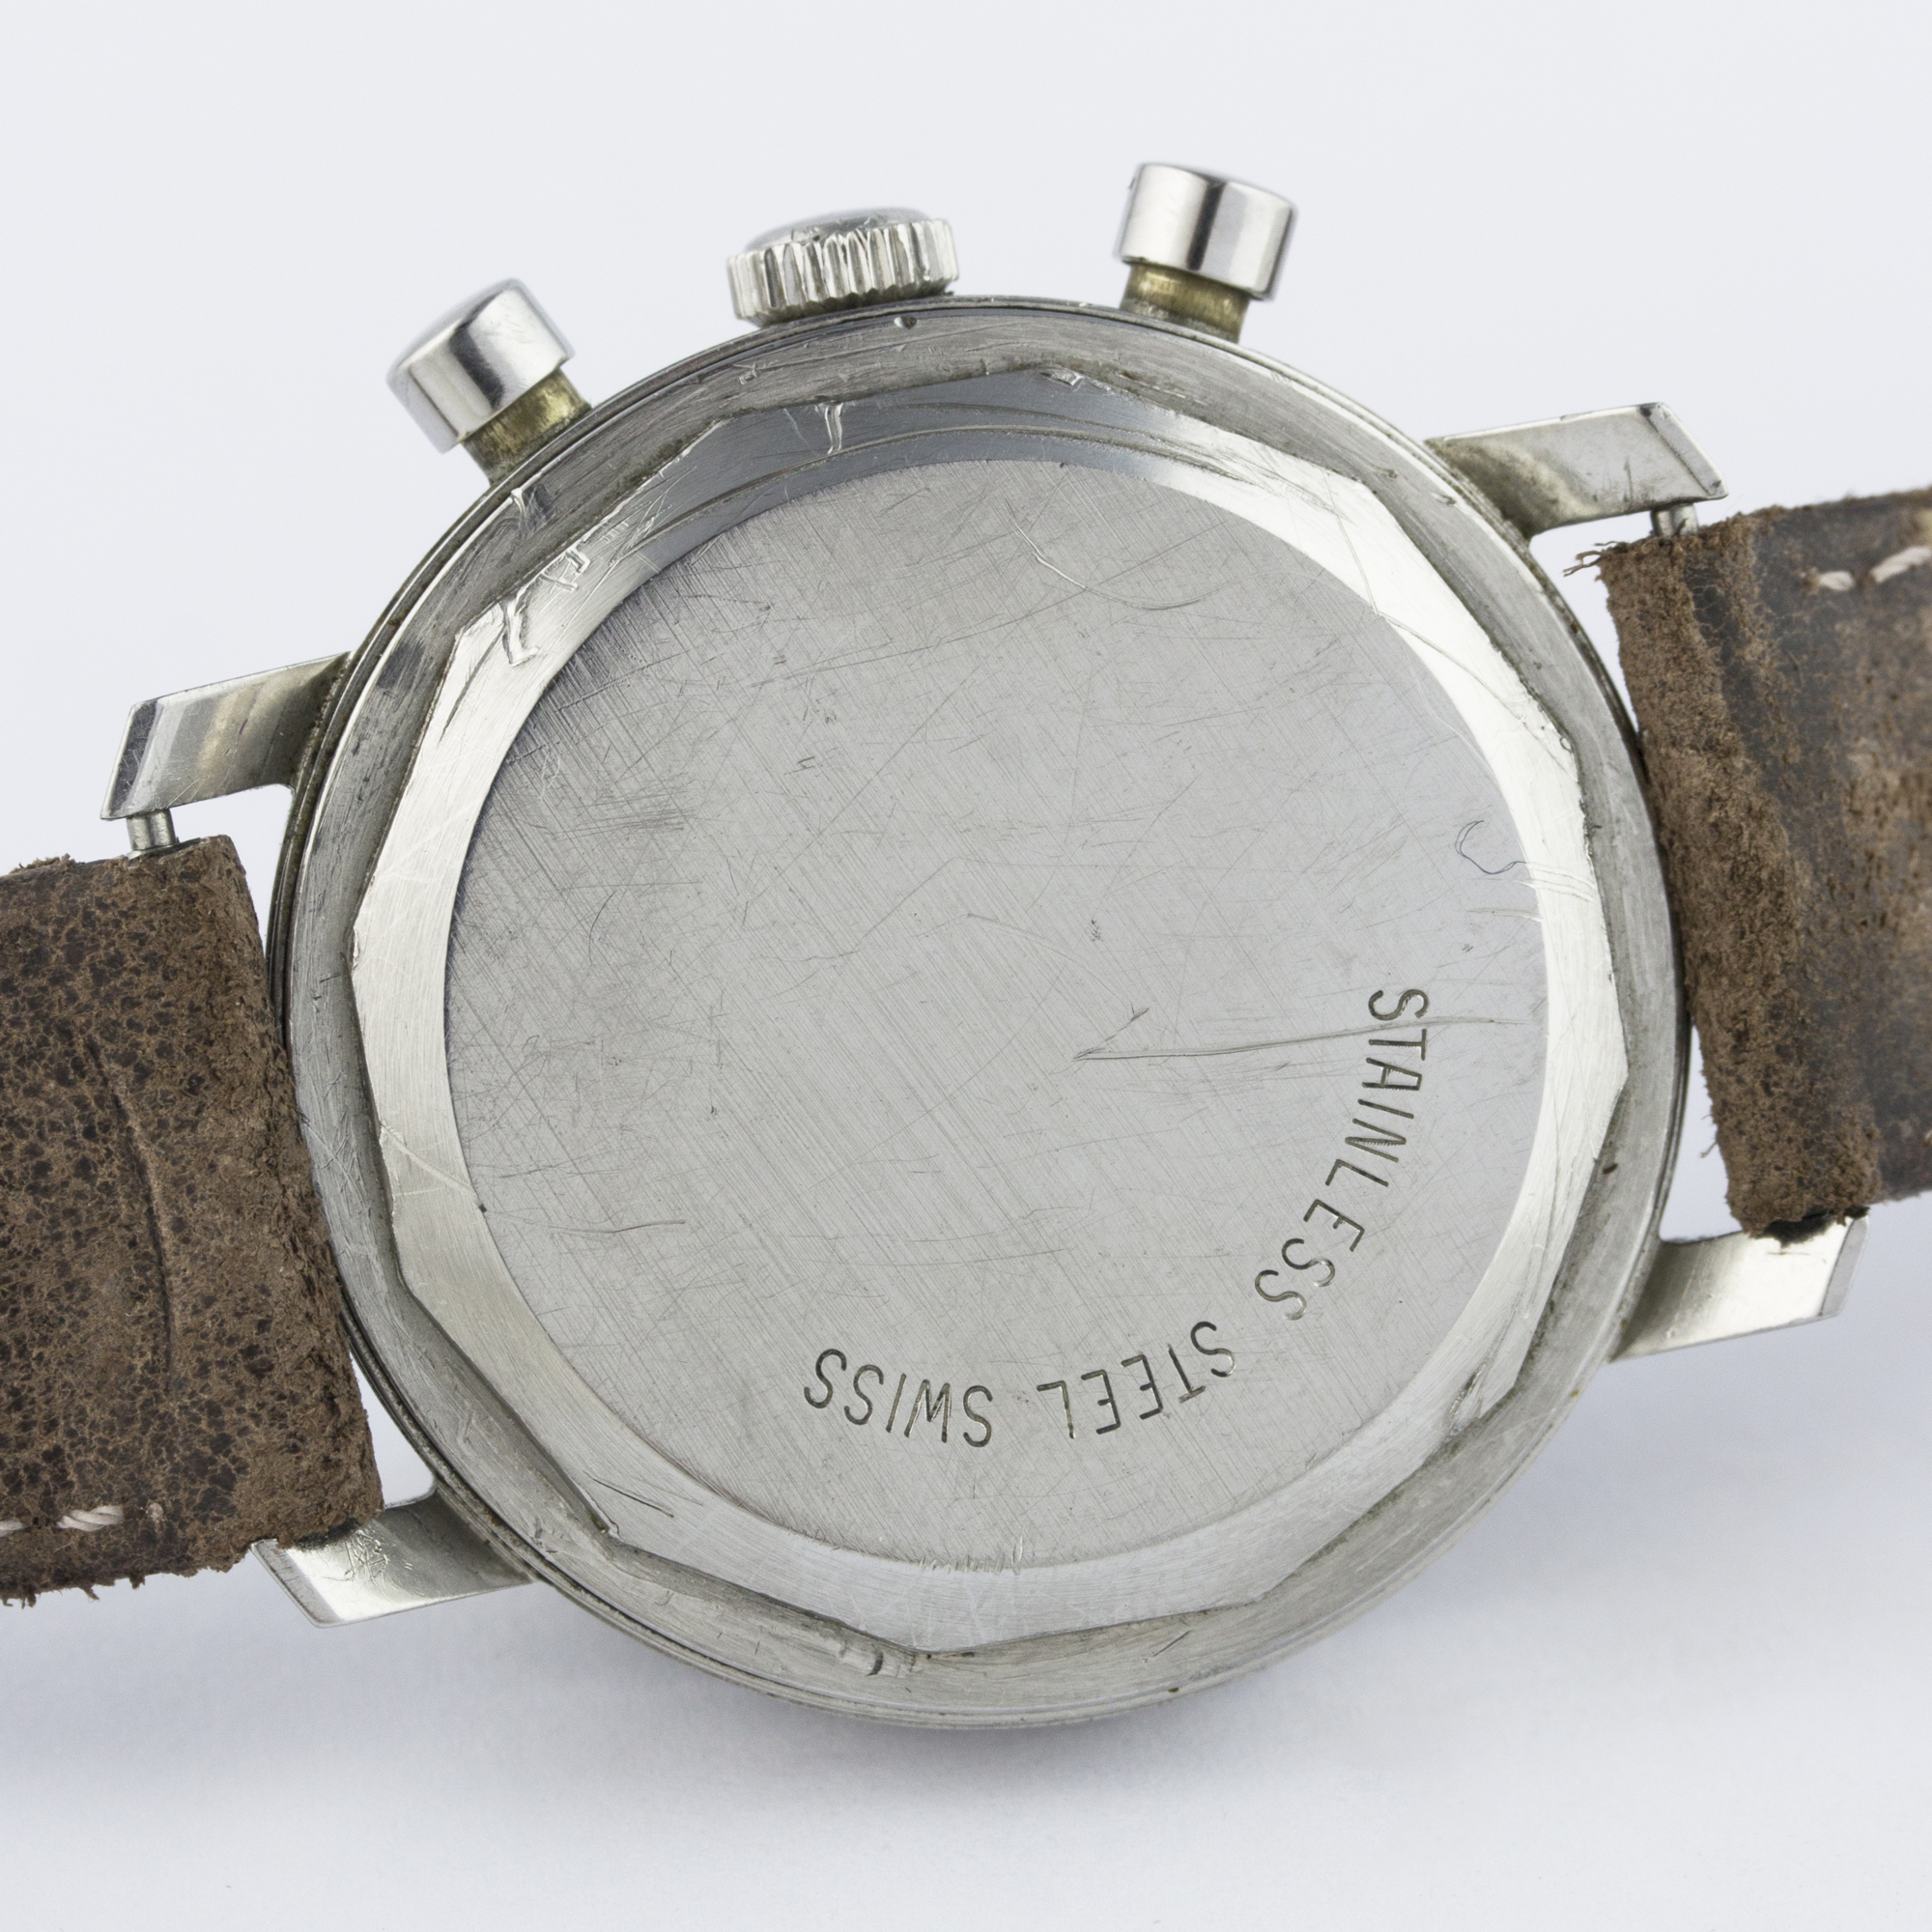 A GENTLEMAN’S STAINLESS STEEL VANTAGE CHRONOGRAPH WRIST WATCH CIRCA 1970 WITH "CHOCOLATE" DIAL D: - Image 6 of 8